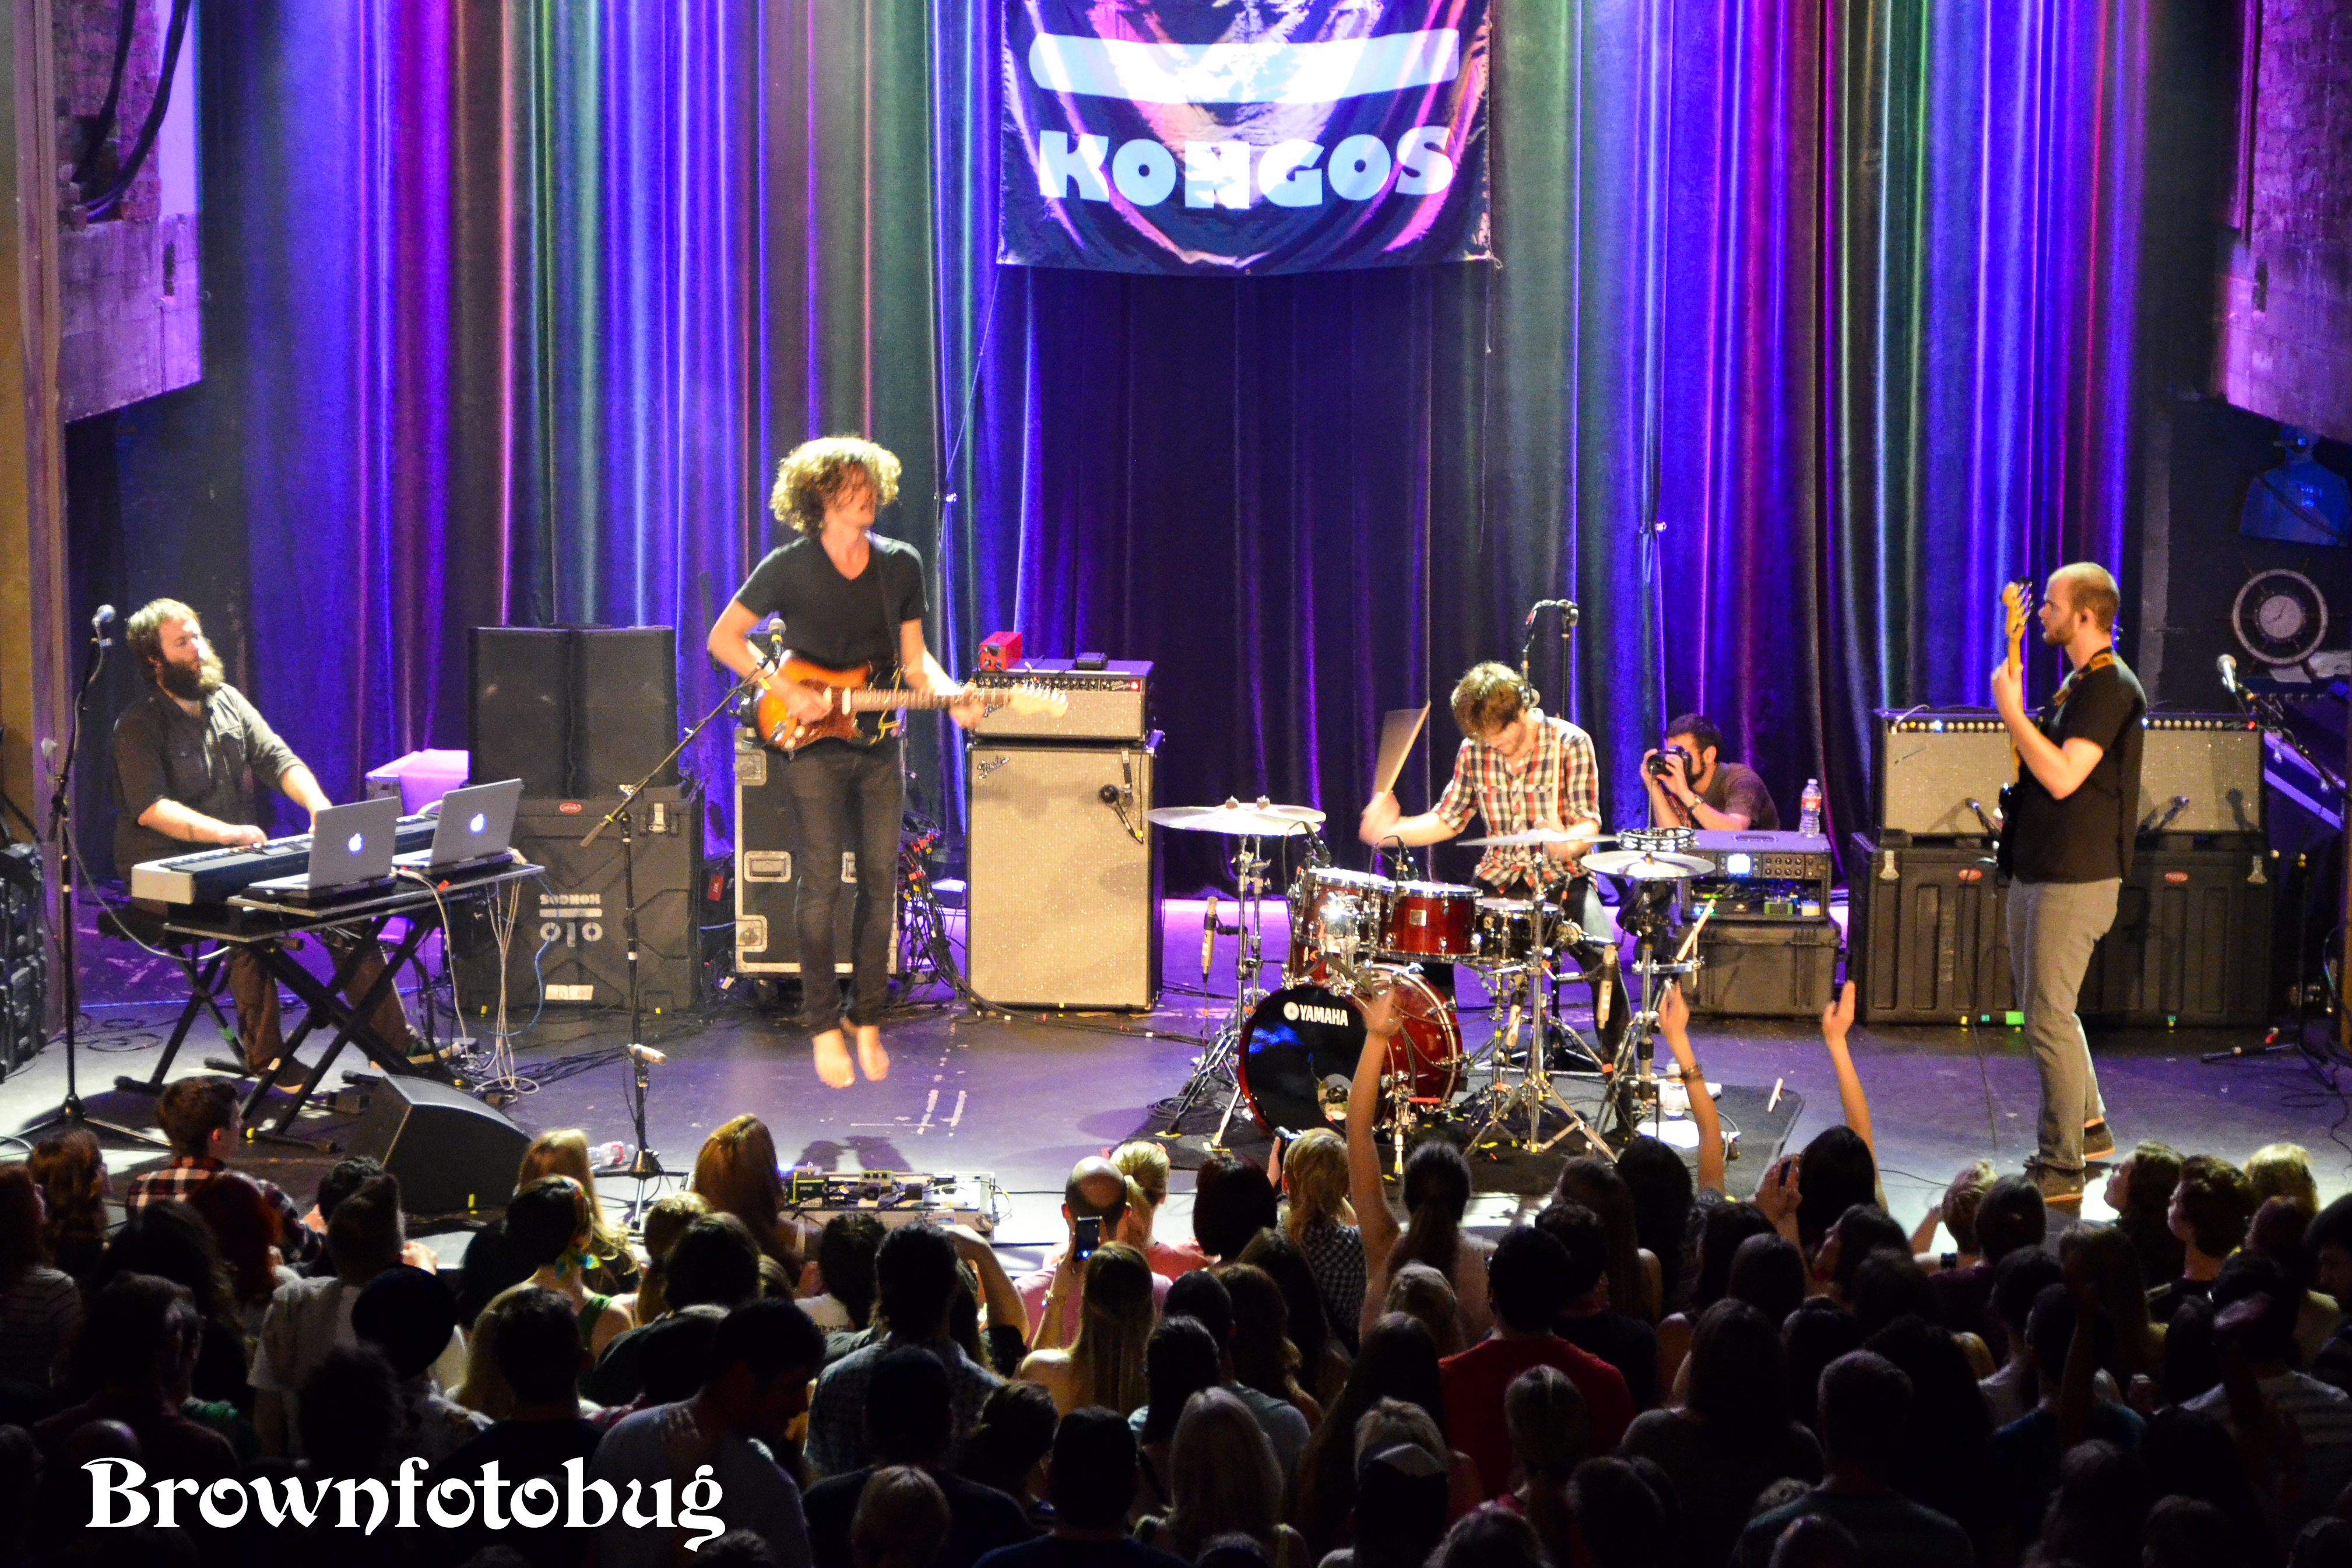 KONGOS Live at Neptune Theater (Photo by Arlene Brown)